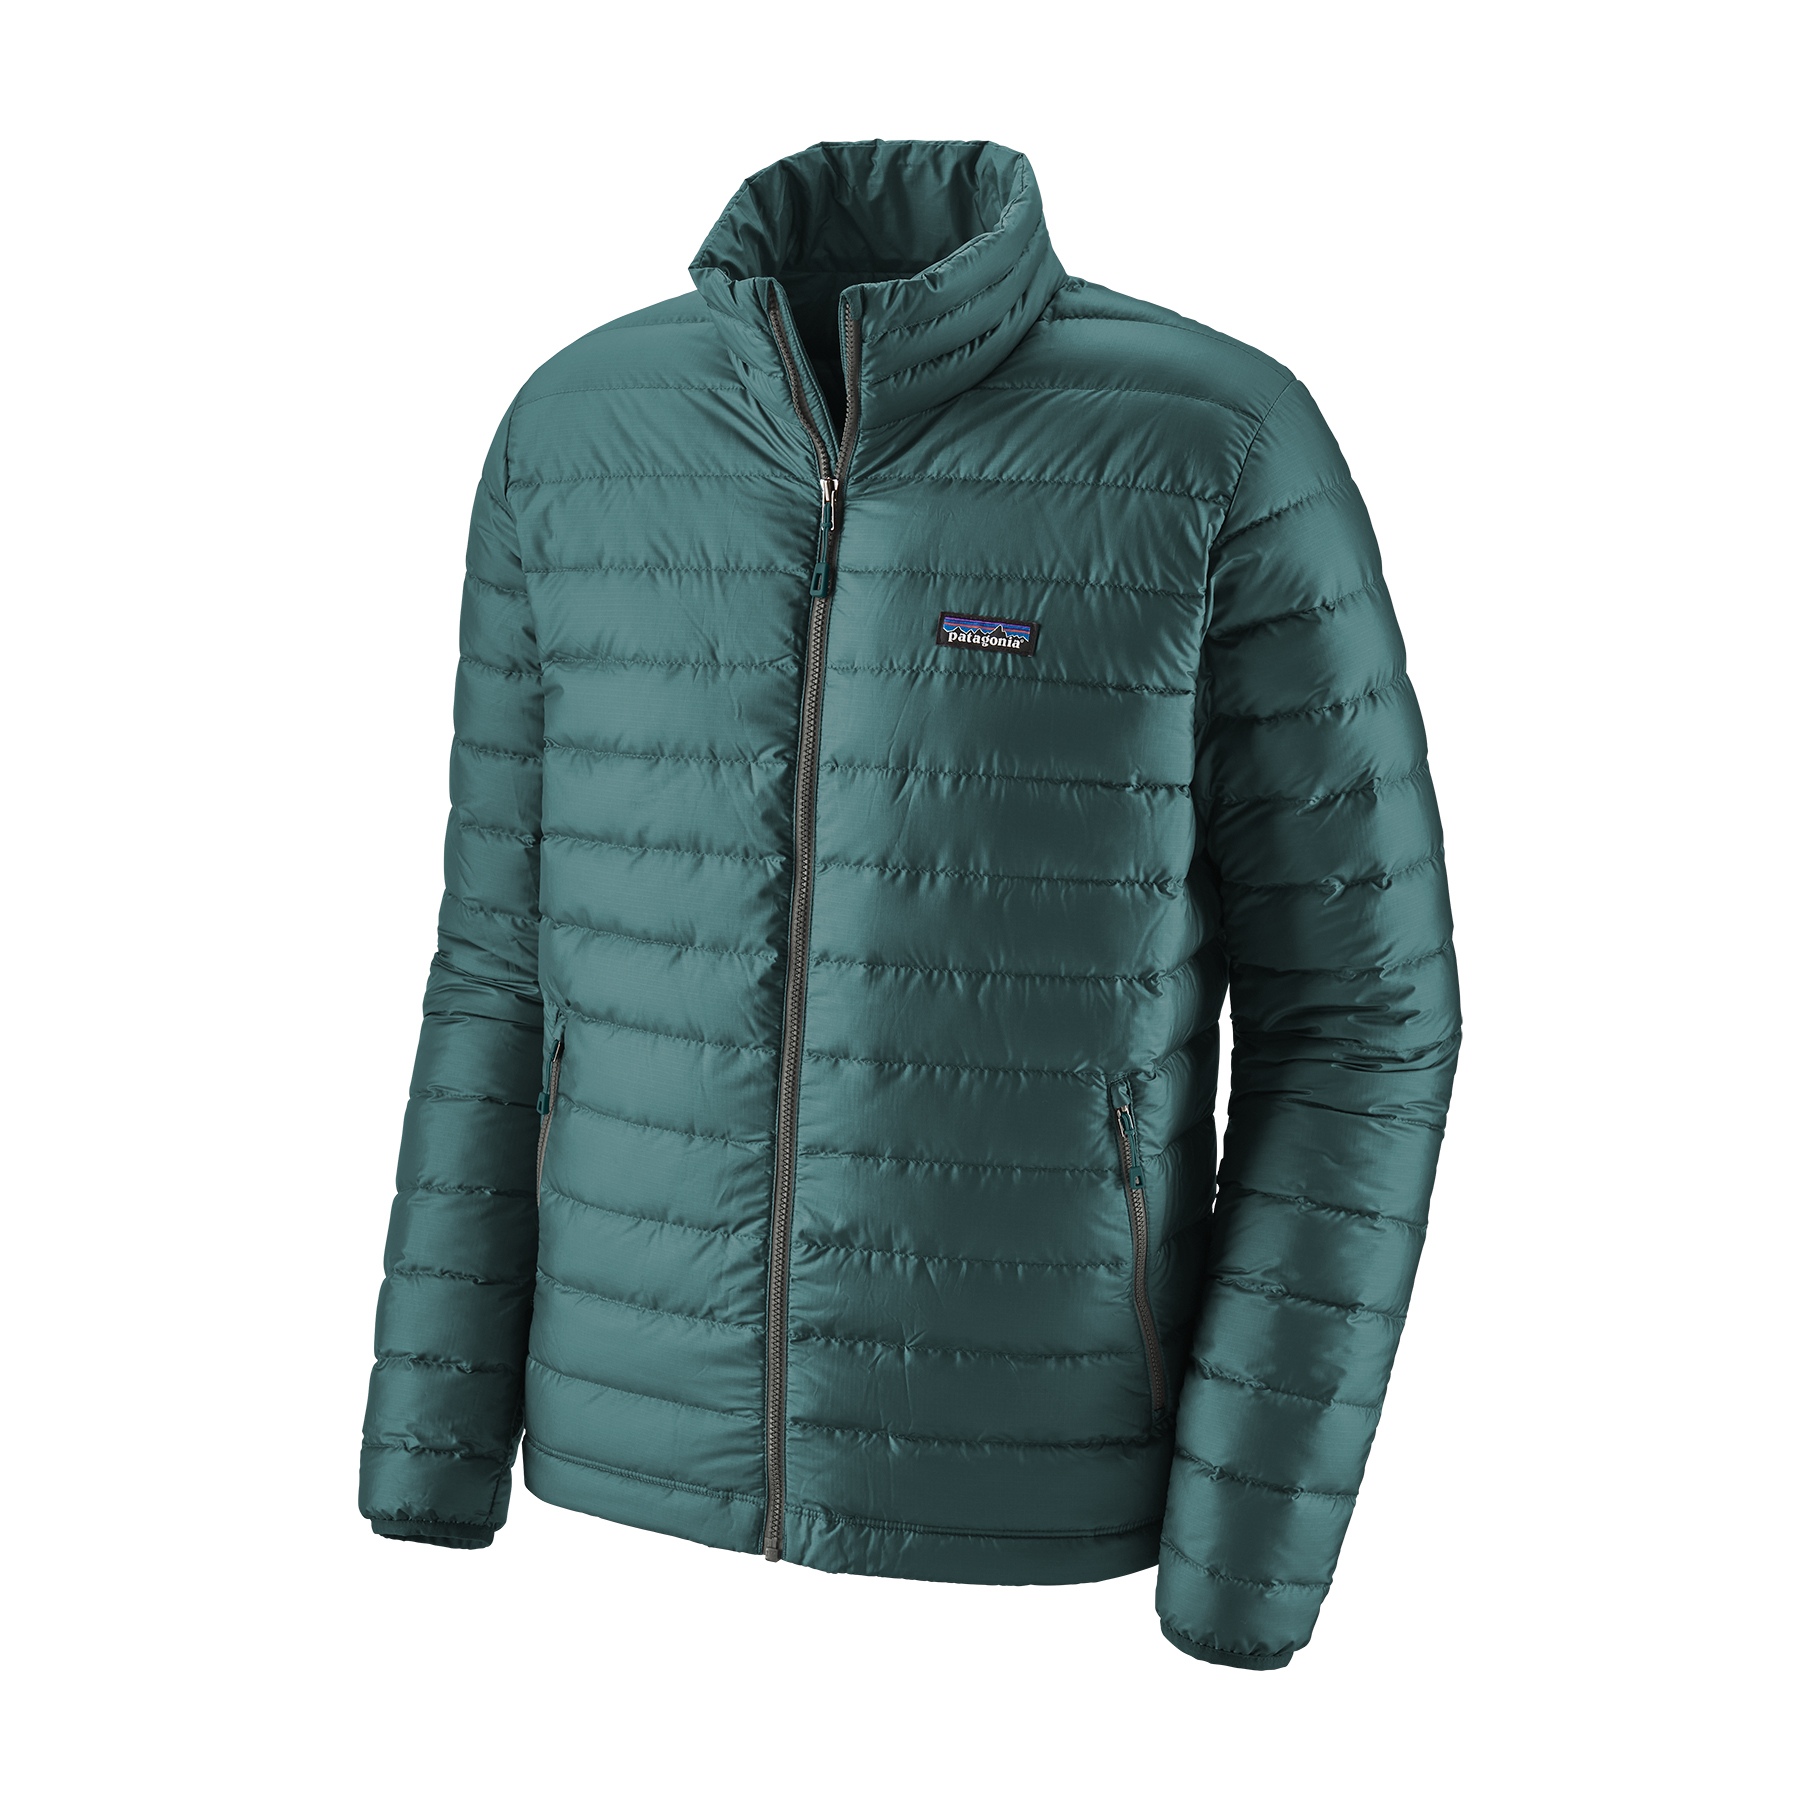 Patagonia's President's Day Sale Features Winter Outerwear for Half-Off